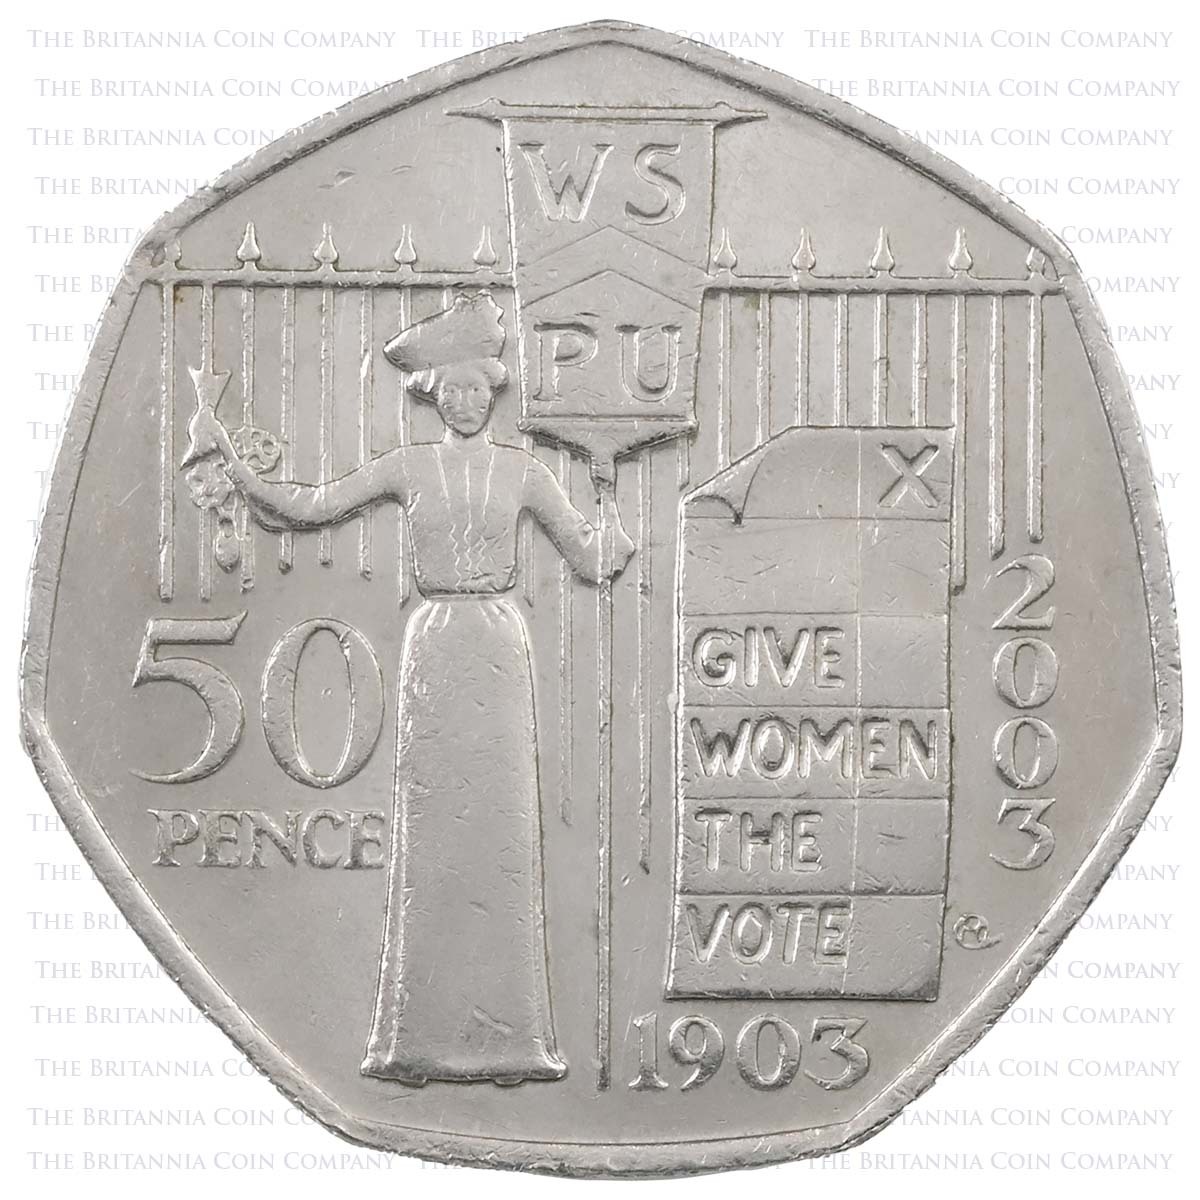 2003 Suffragettes Women's Social And Political Union Votes For Women Circulated Fifty Pence Coin Reverse